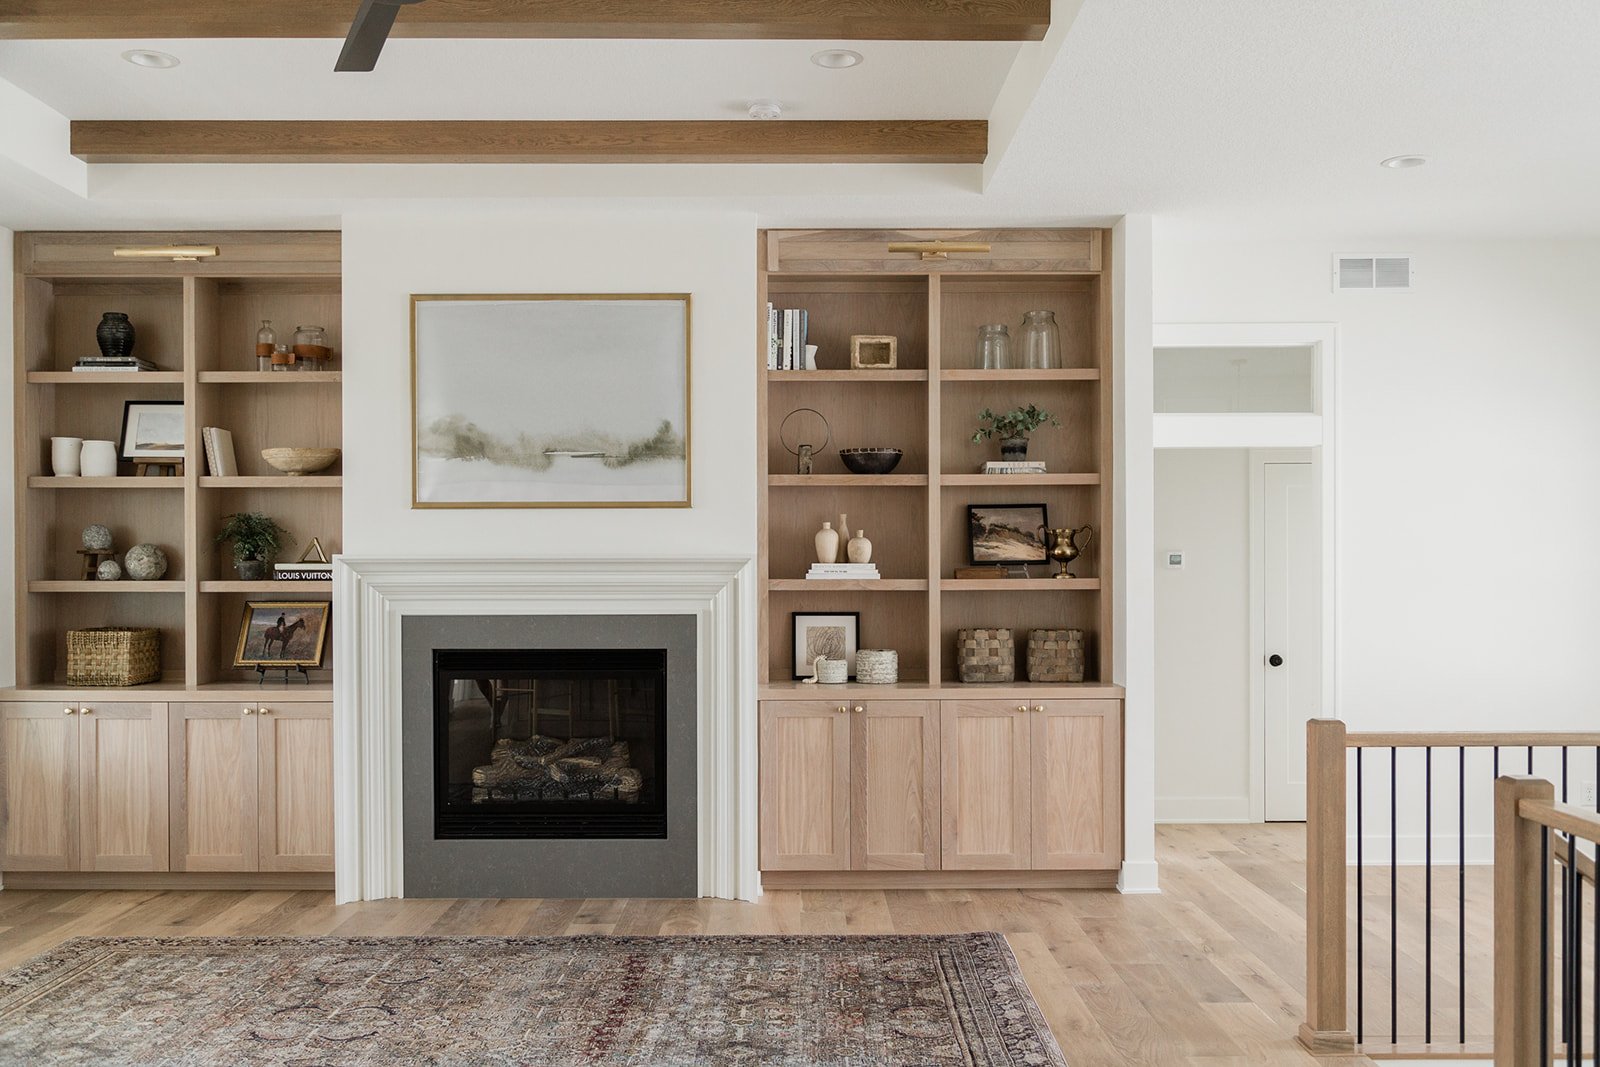 10 Stunning Ideas For Built Ins Around a Fireplace